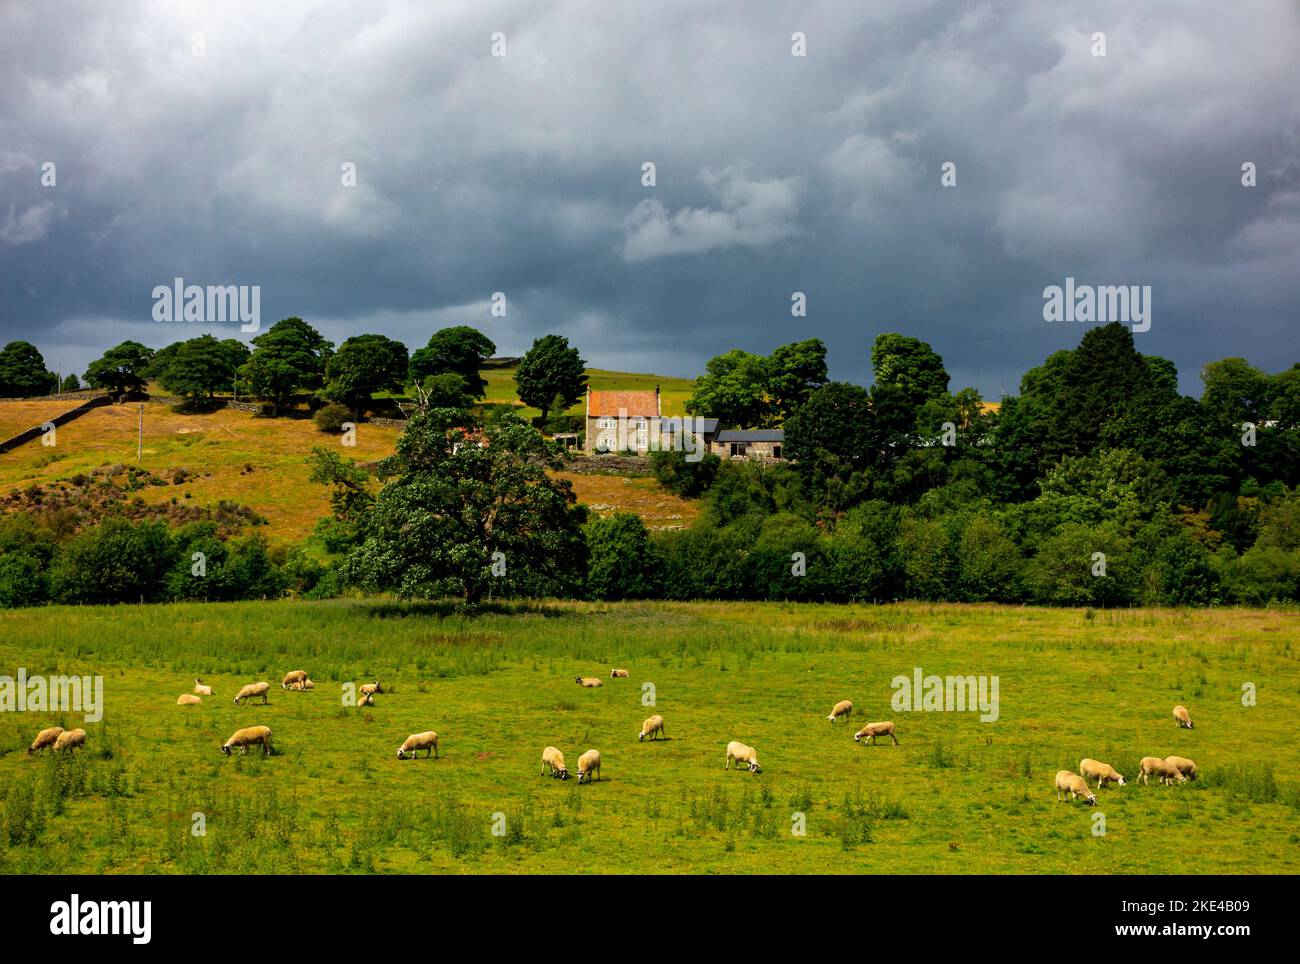 Sheep grazing on farmland beneath a stormy sky near Danby in the North York Moors National Park Yorkshire England UK. Stock Photo